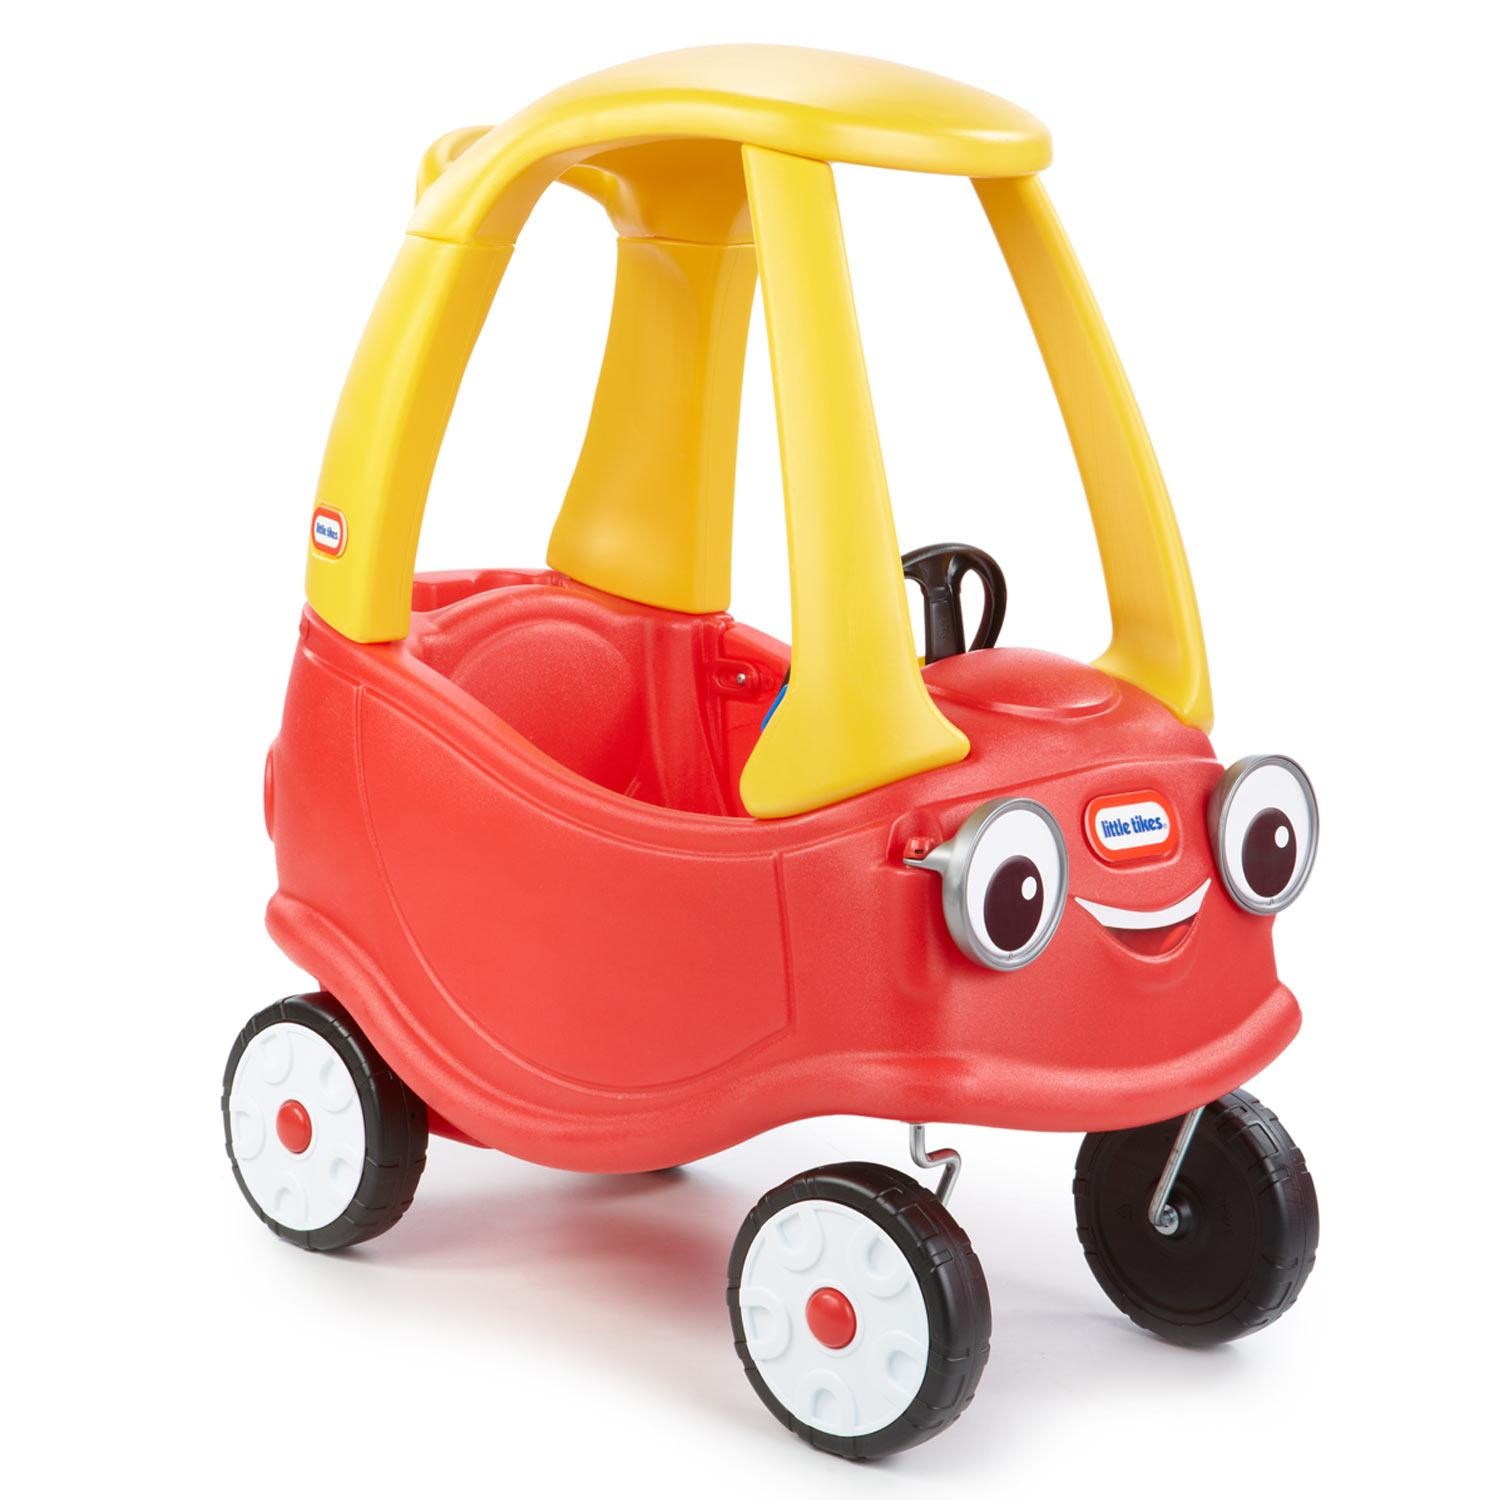 Adult-size Little Tikes car up for auction on